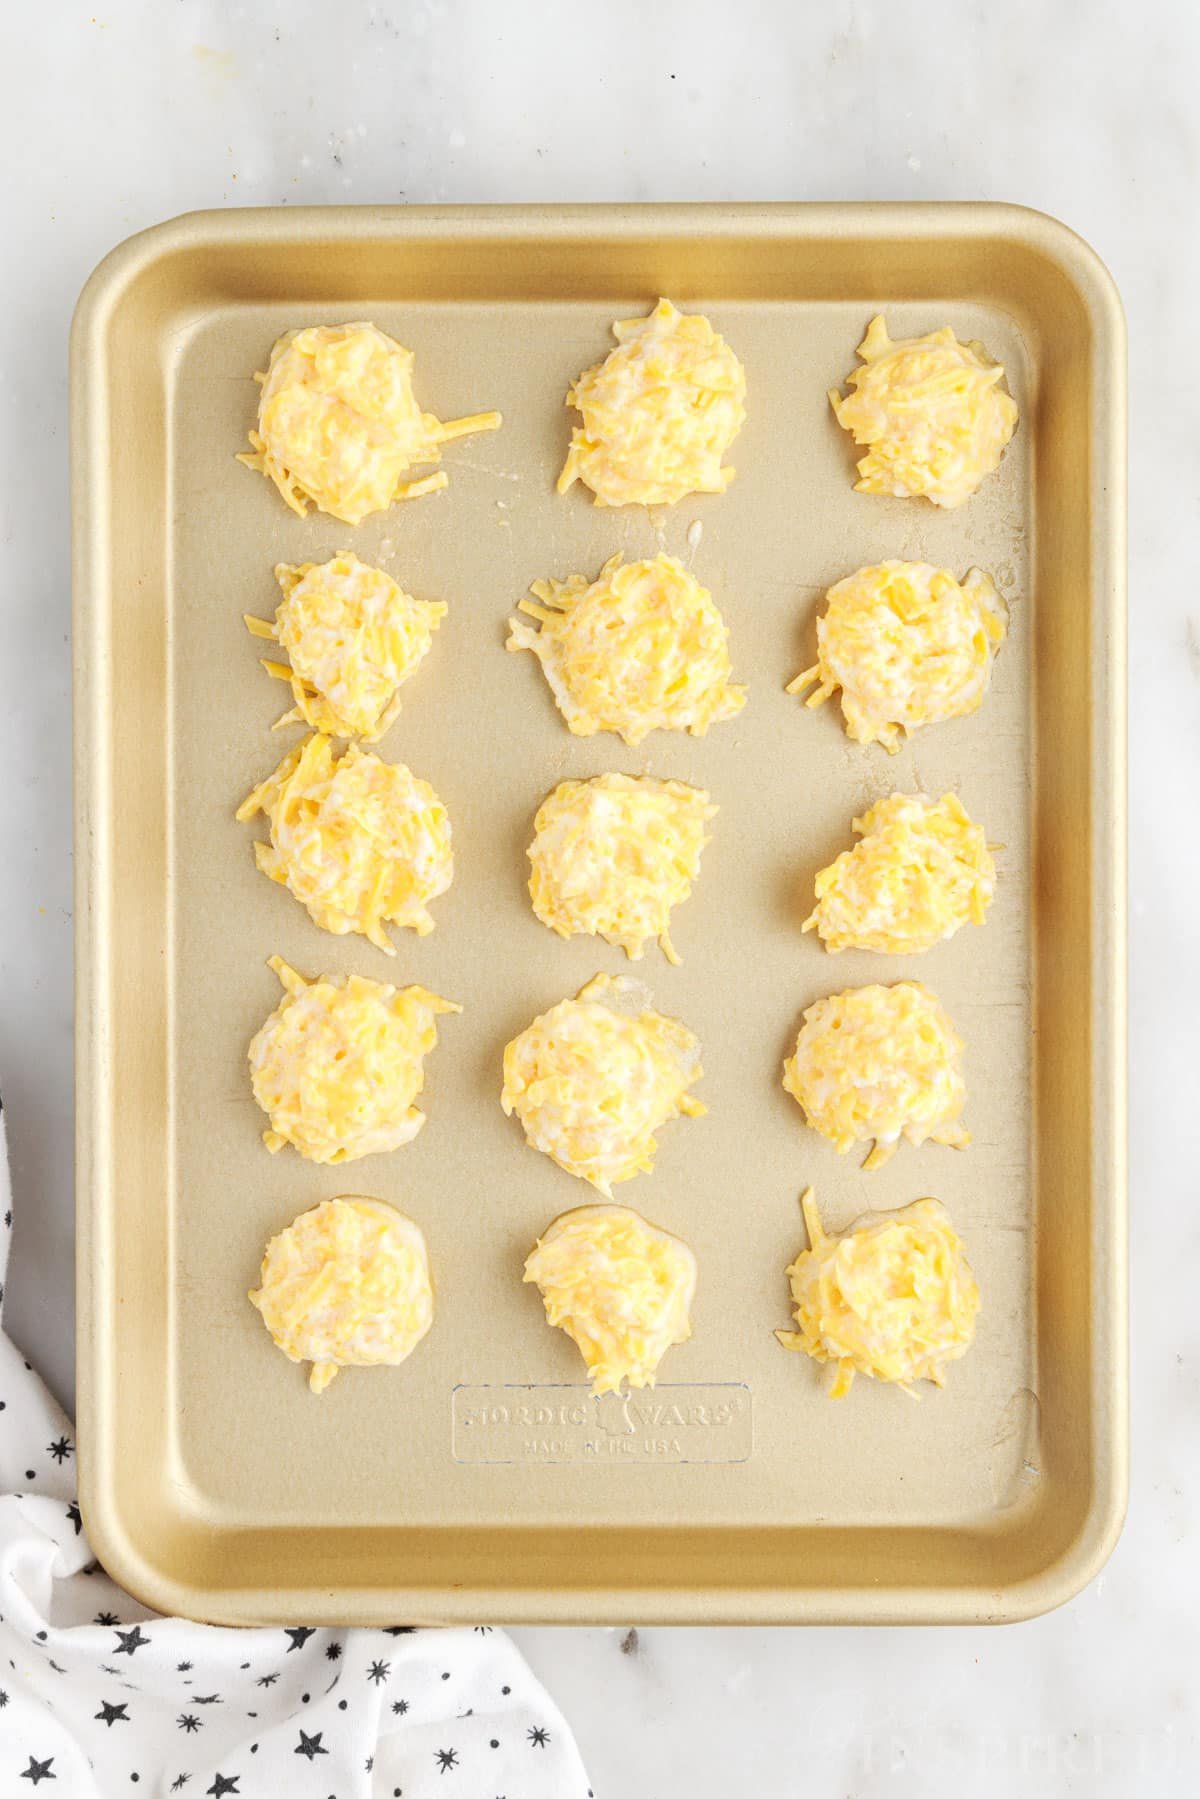 Cookie sheet with 15 Fried Cheese Balls on it before baking.